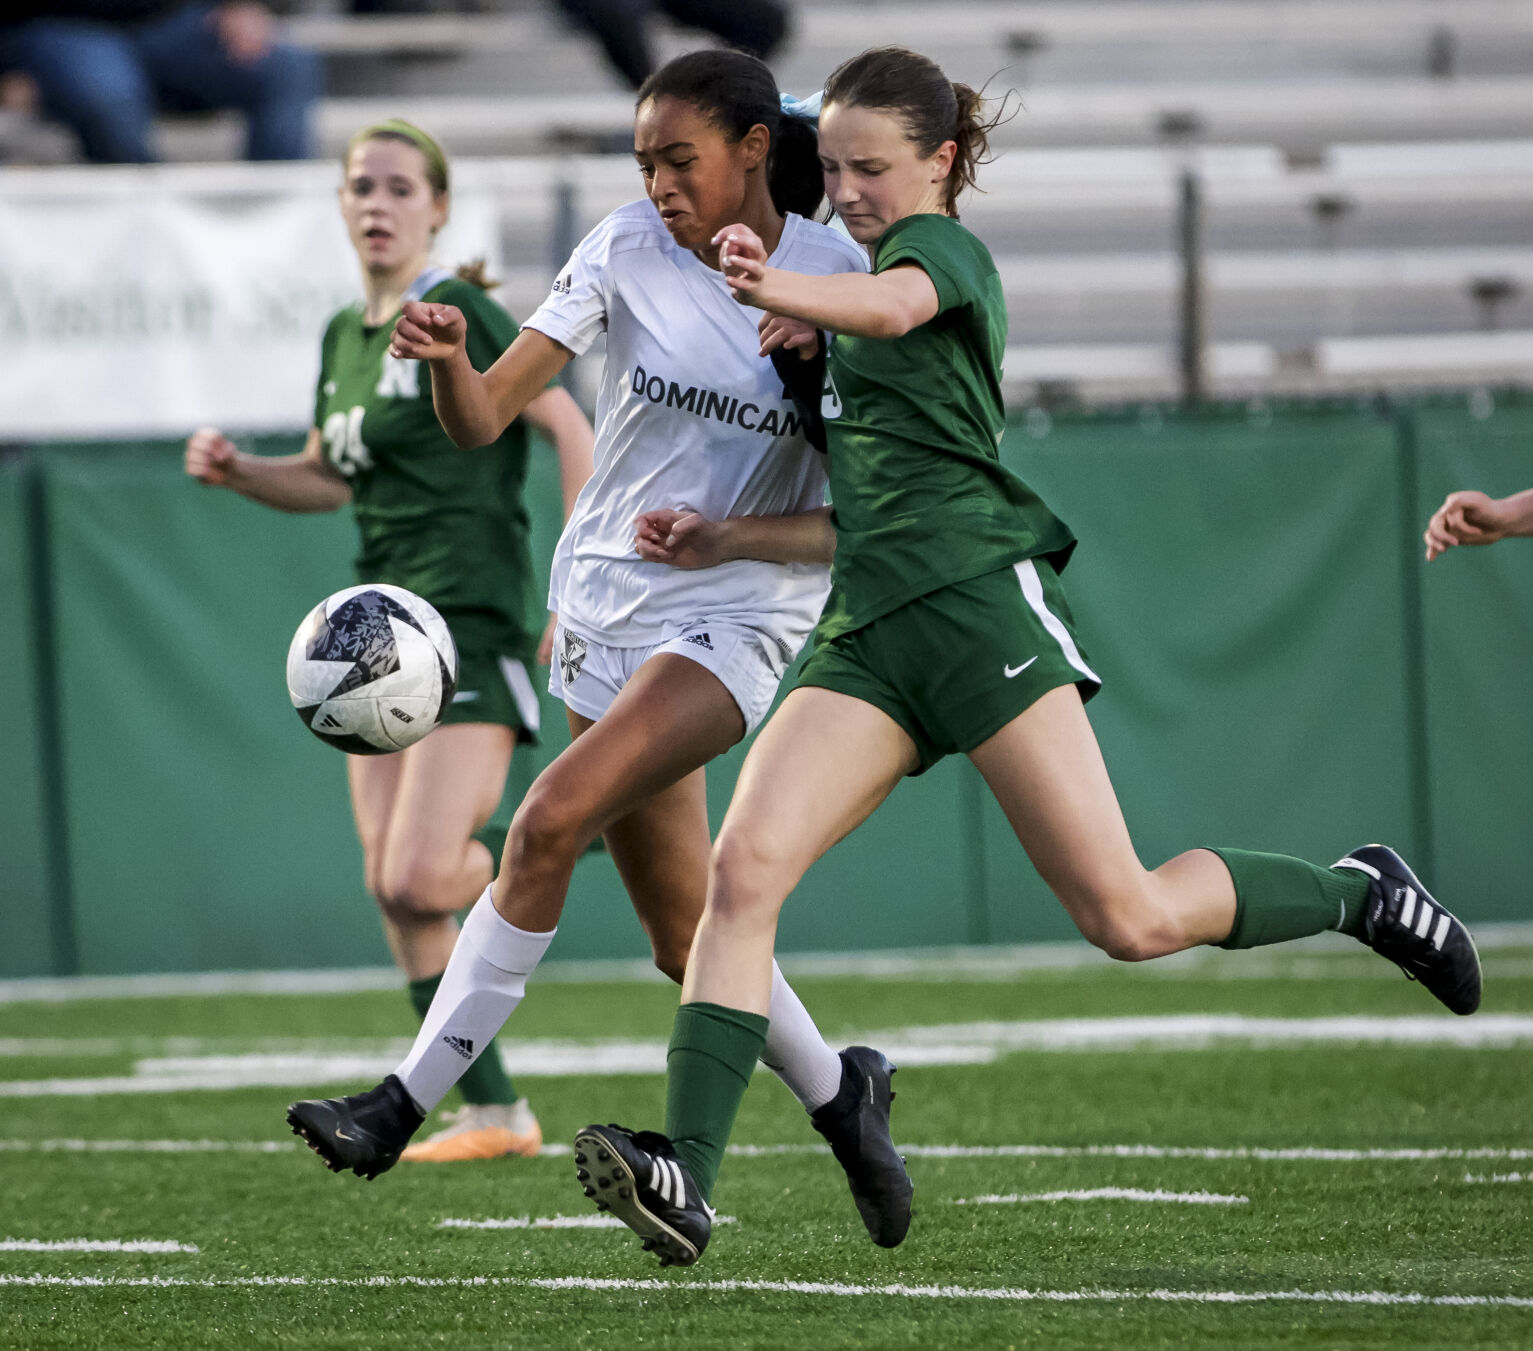 Check out the New Orleans area high school soccer pairings for the regional round of the playoffs